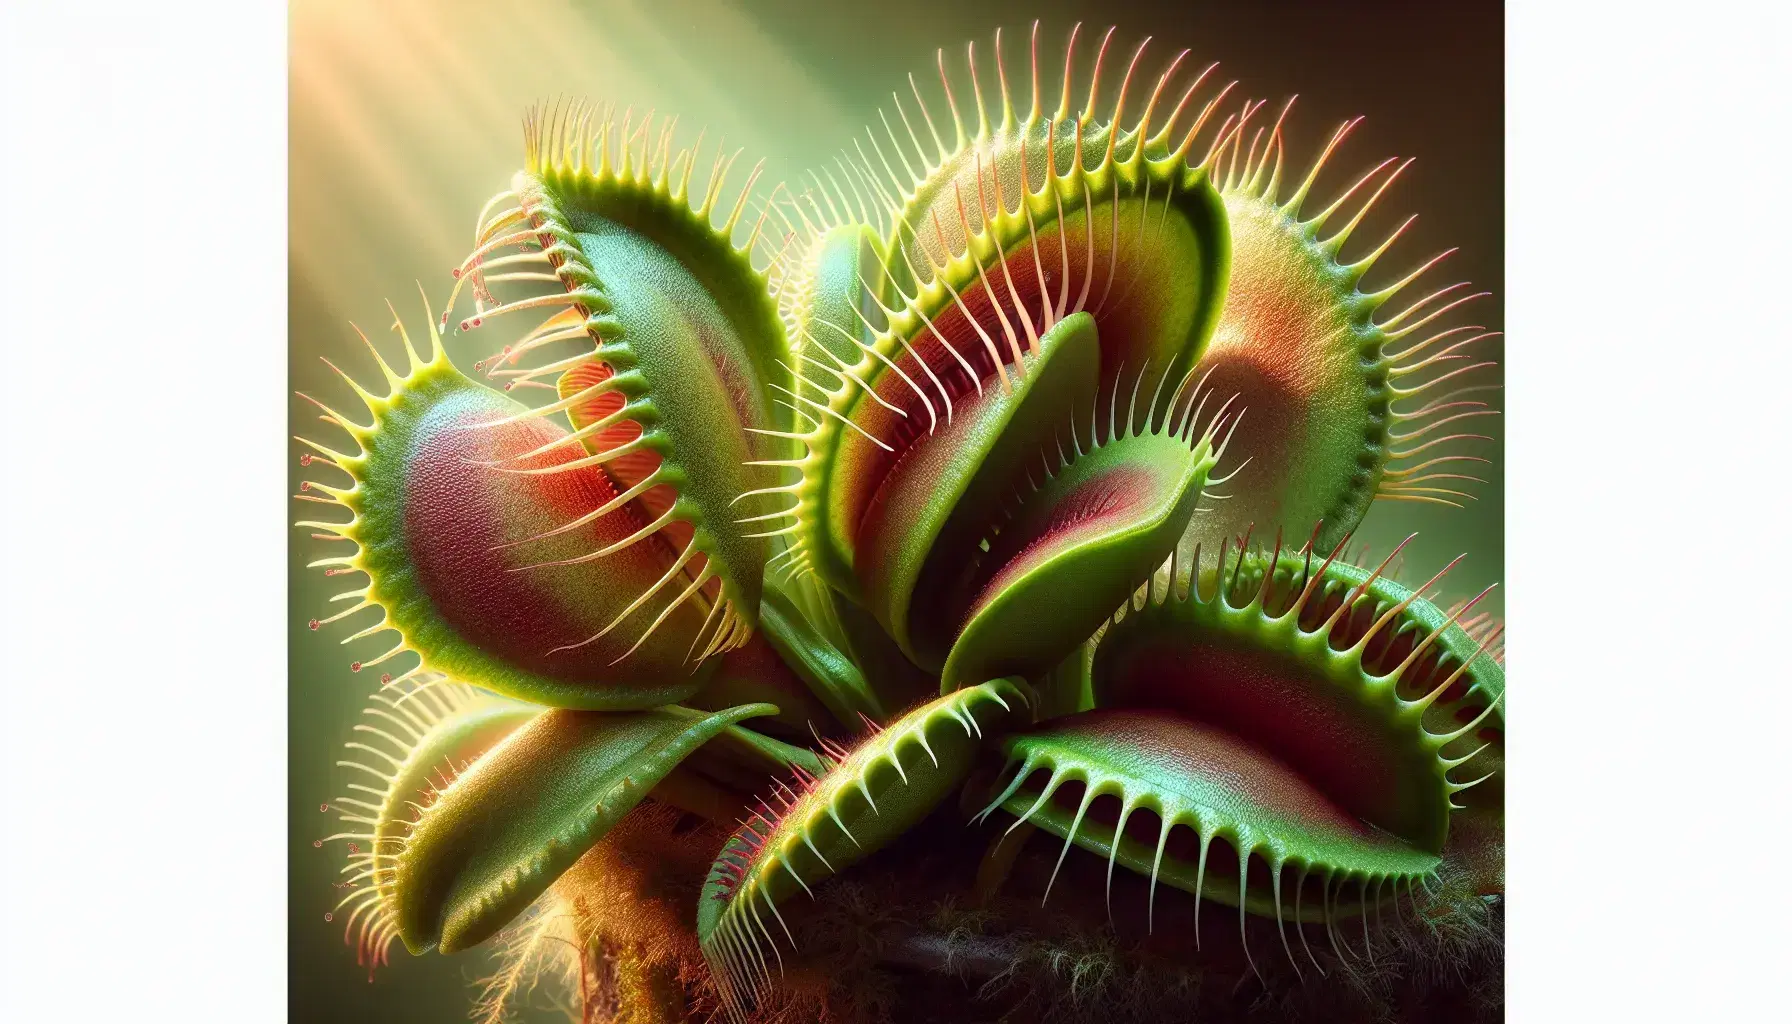 Close-up of a Dionaea muscipula plant with closed and open trap leaves, serrated edges and red-green hues, in natural habitat.